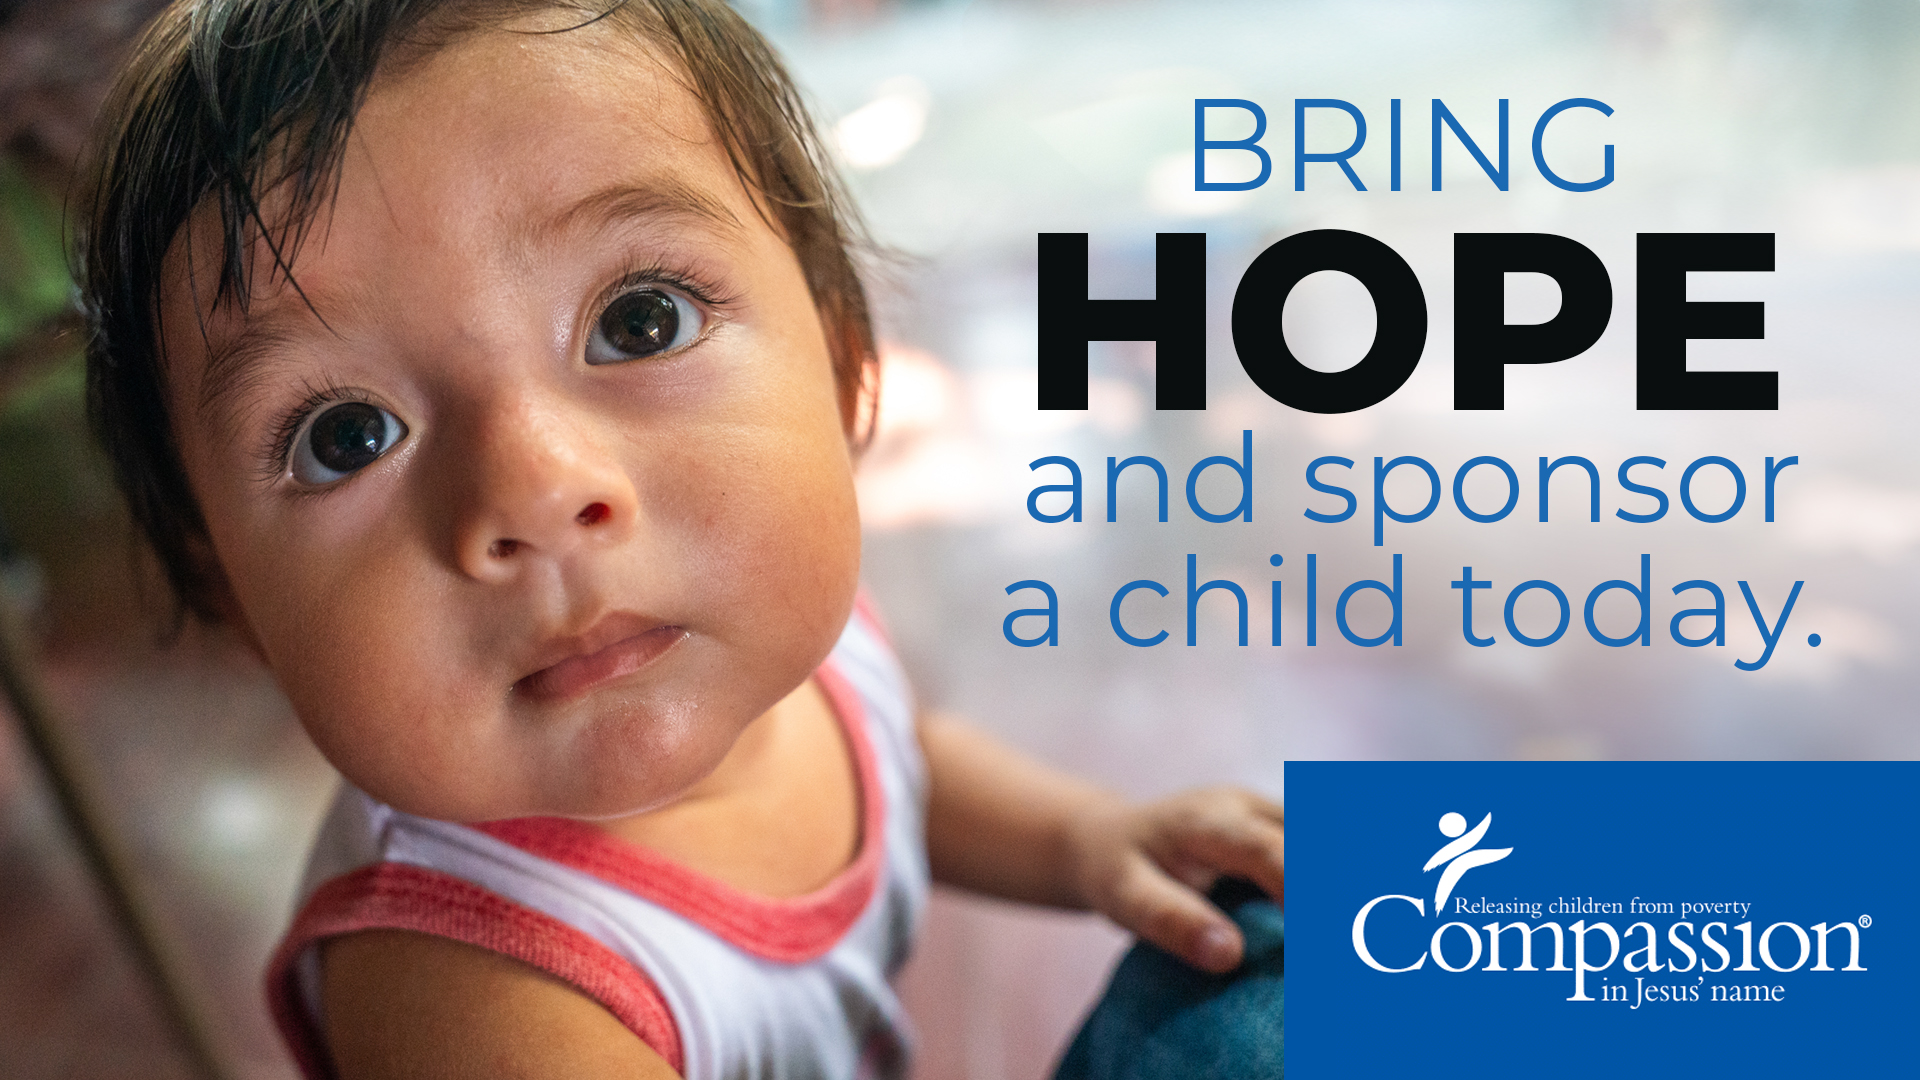 Sponsor a child in Jesus’ name with Compassion International.